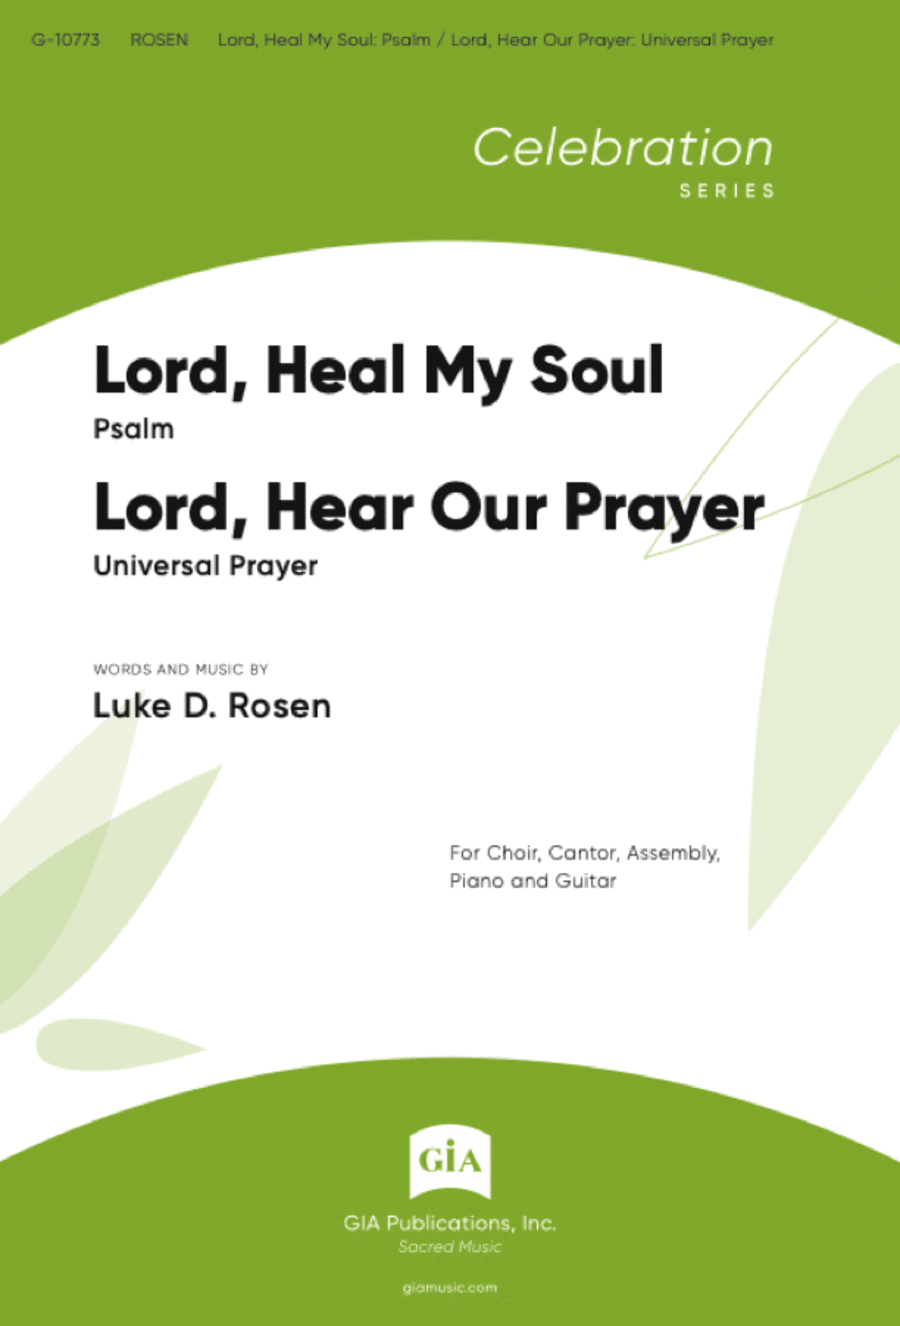  Lord, Heal My Soul / Lord, Hear Our Prayer